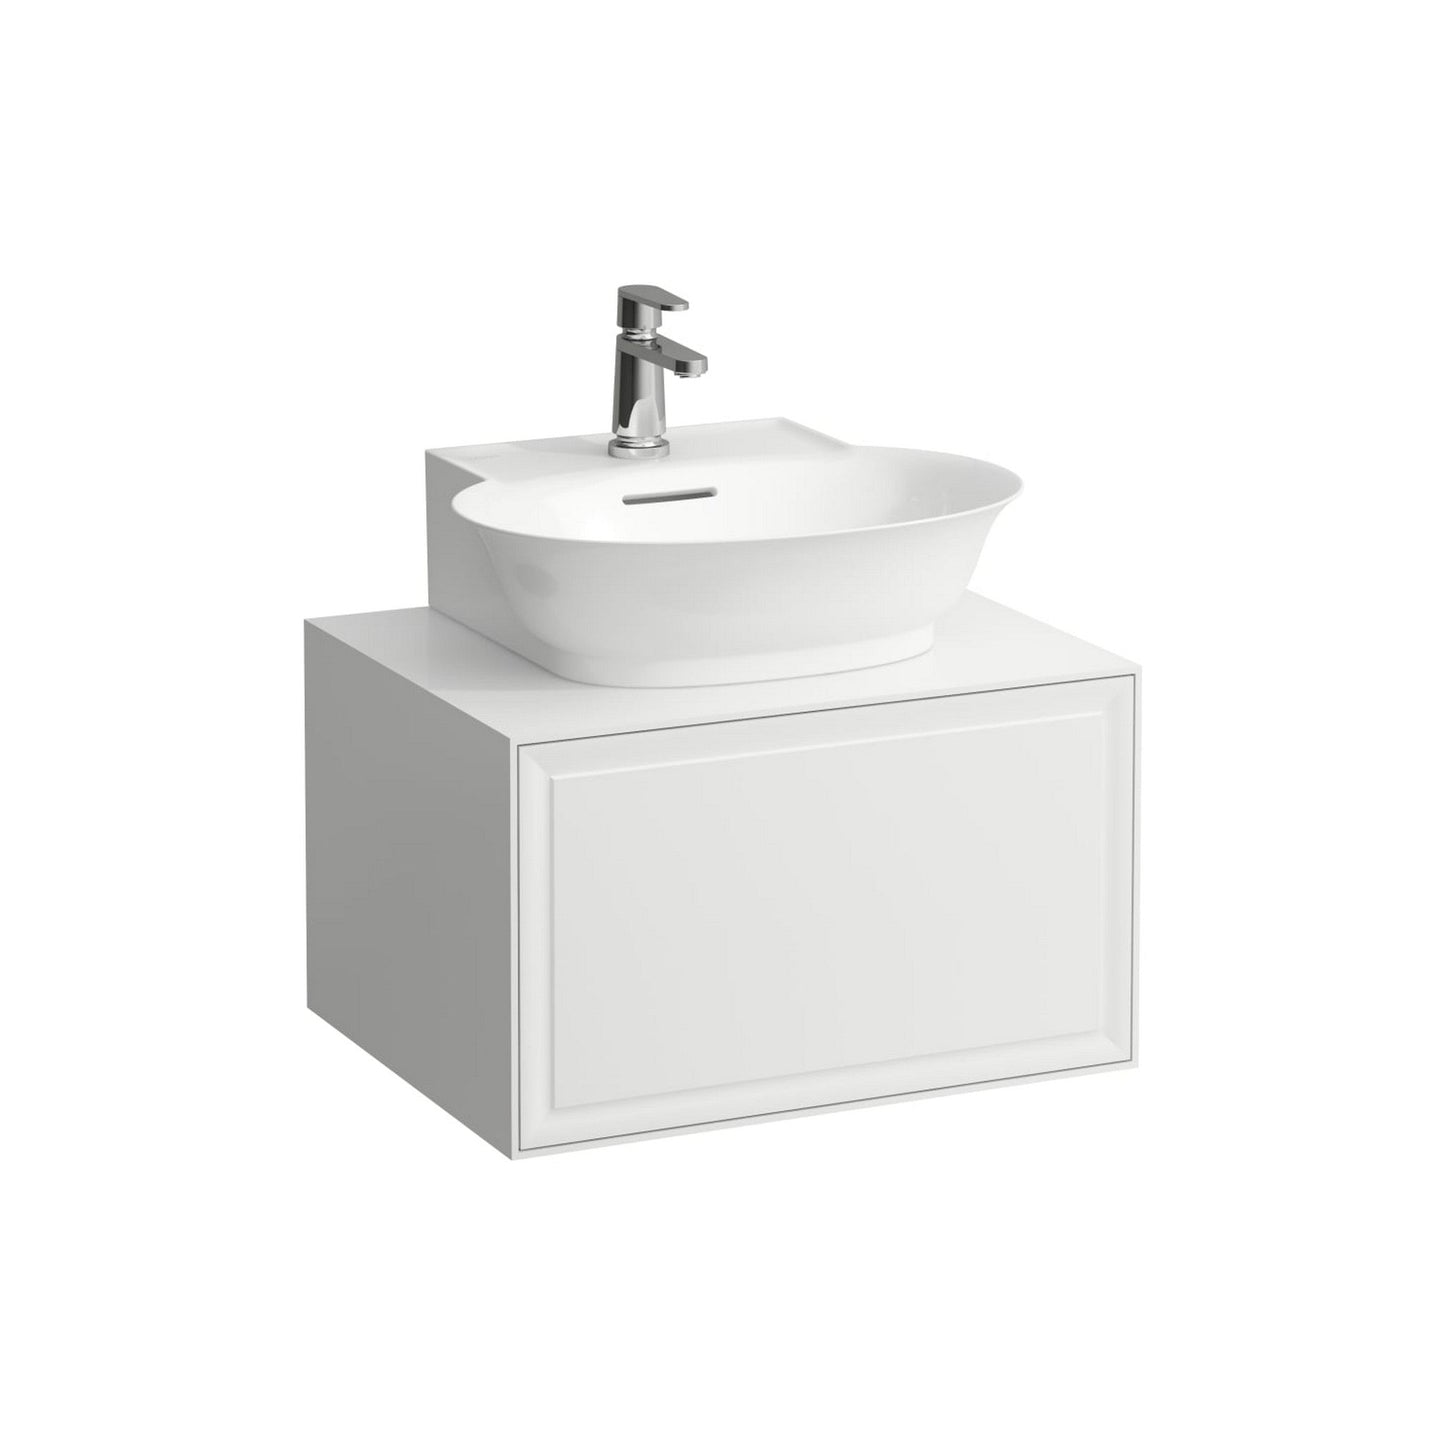 Laufen New Classic 23" 1-Drawer White Wall-Mounted Vanity for New Classic Bathroom Sink Model: H816852